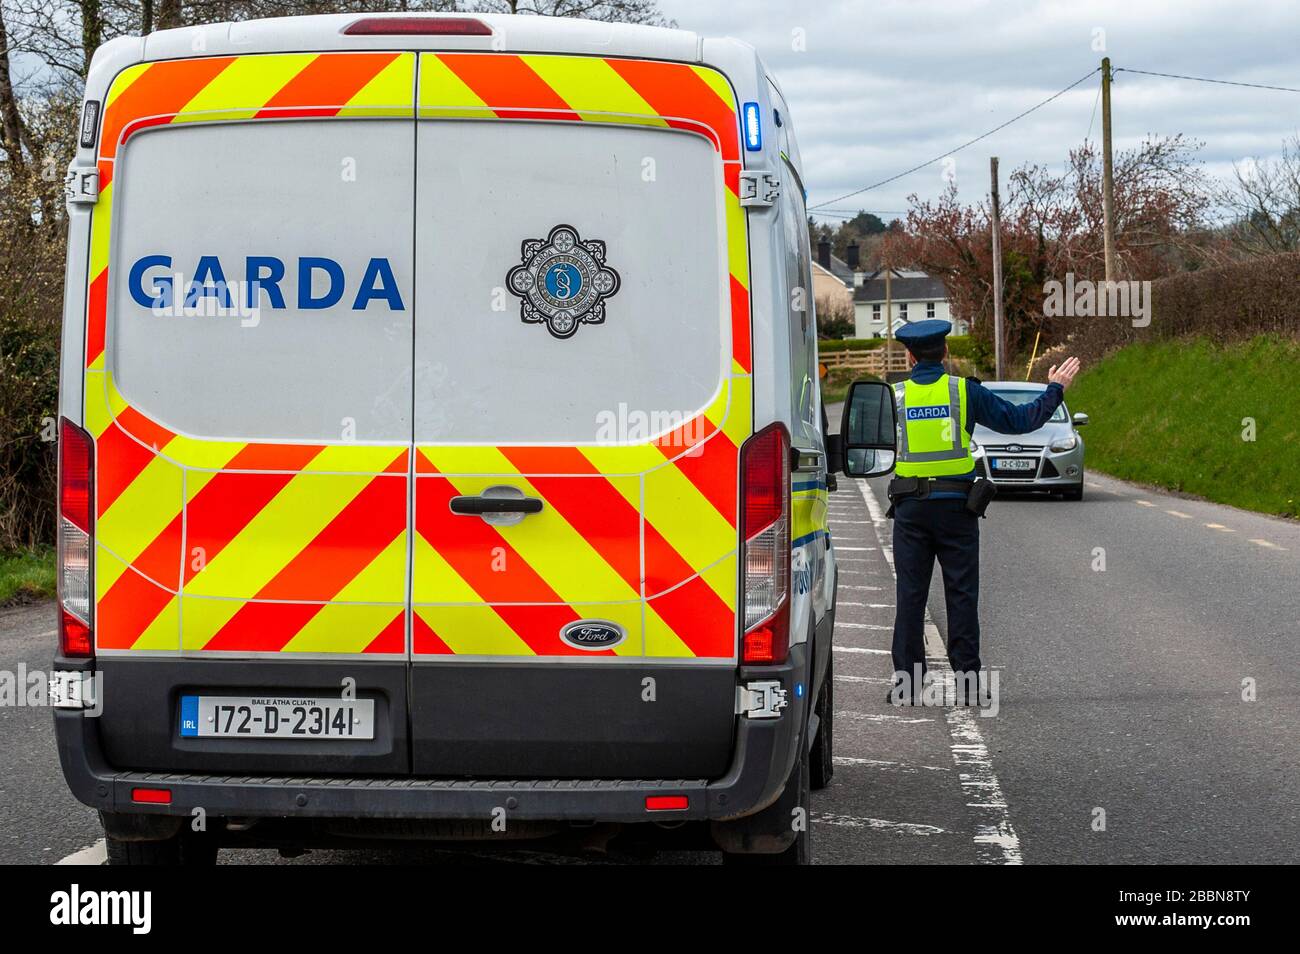 Clonakilty, West Cork, Ireland. 1st Apr, 2020. As part of the mandatory 'Stay at Home' order imposed by the Irish government on Friday last, the Gardai have been tasked to ensure people are complying to help stop the spread of Covid-19. A Garda Checkpoint was in place on the Clonakilty to Dunmanway road this afternoon which consisted of 2 regular Gardai. Credit: AG News/Alamy Live News Stock Photo